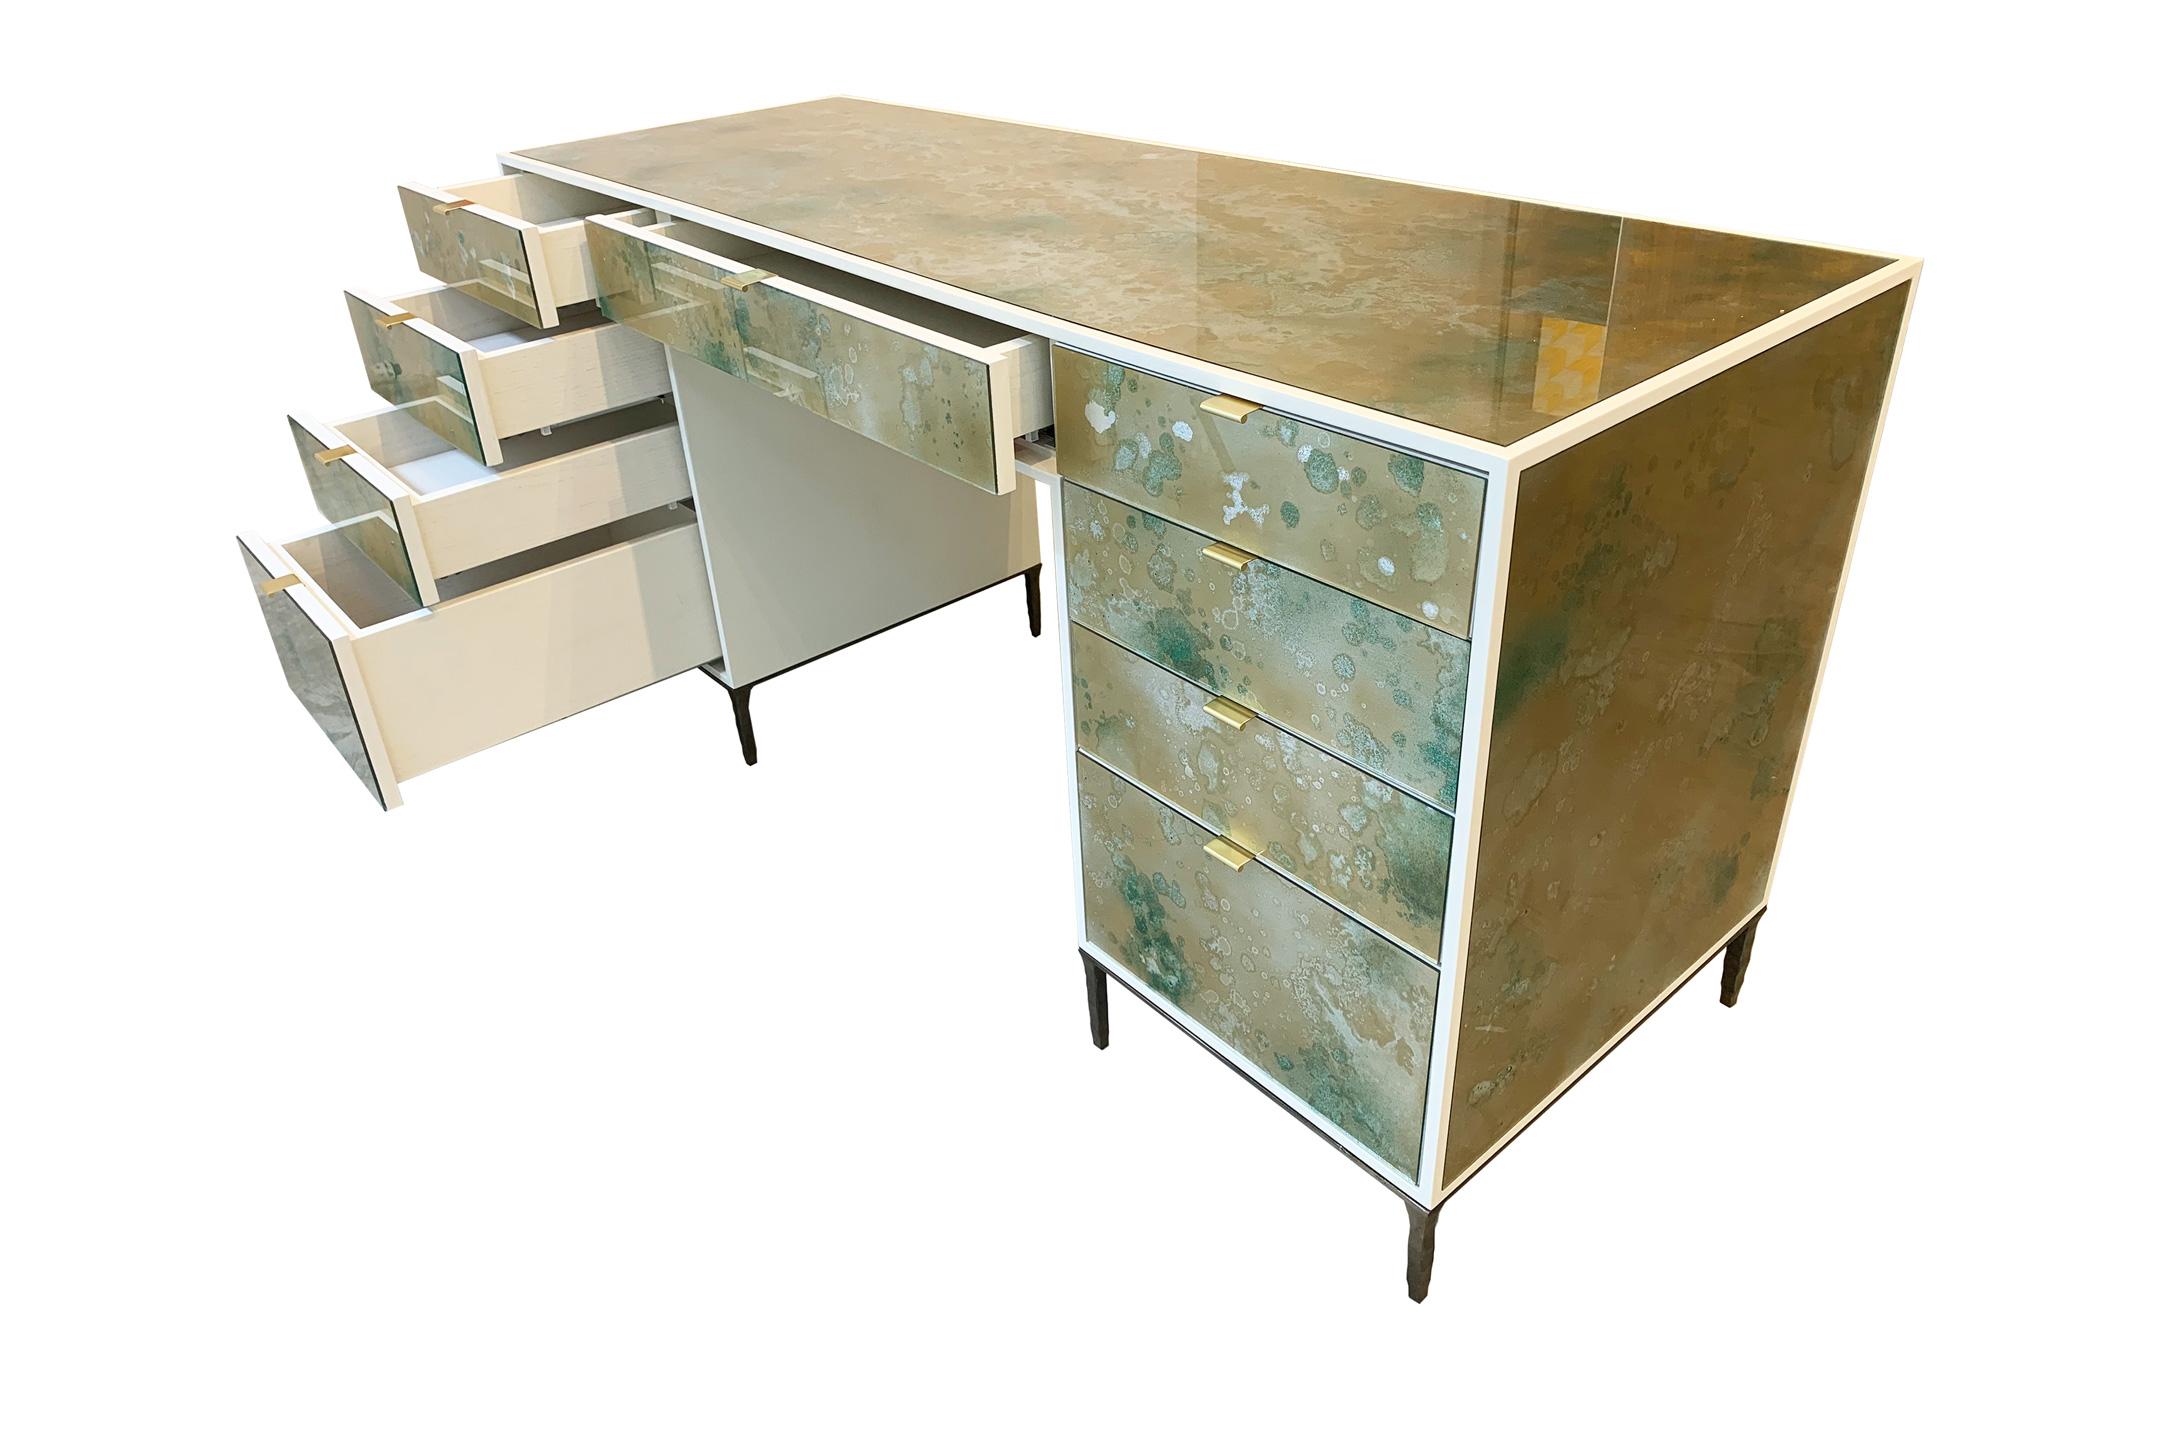 American Modern Eglomise Glass Byzantine Gold Vanity and Forged Metal Legs by Ercole Home For Sale